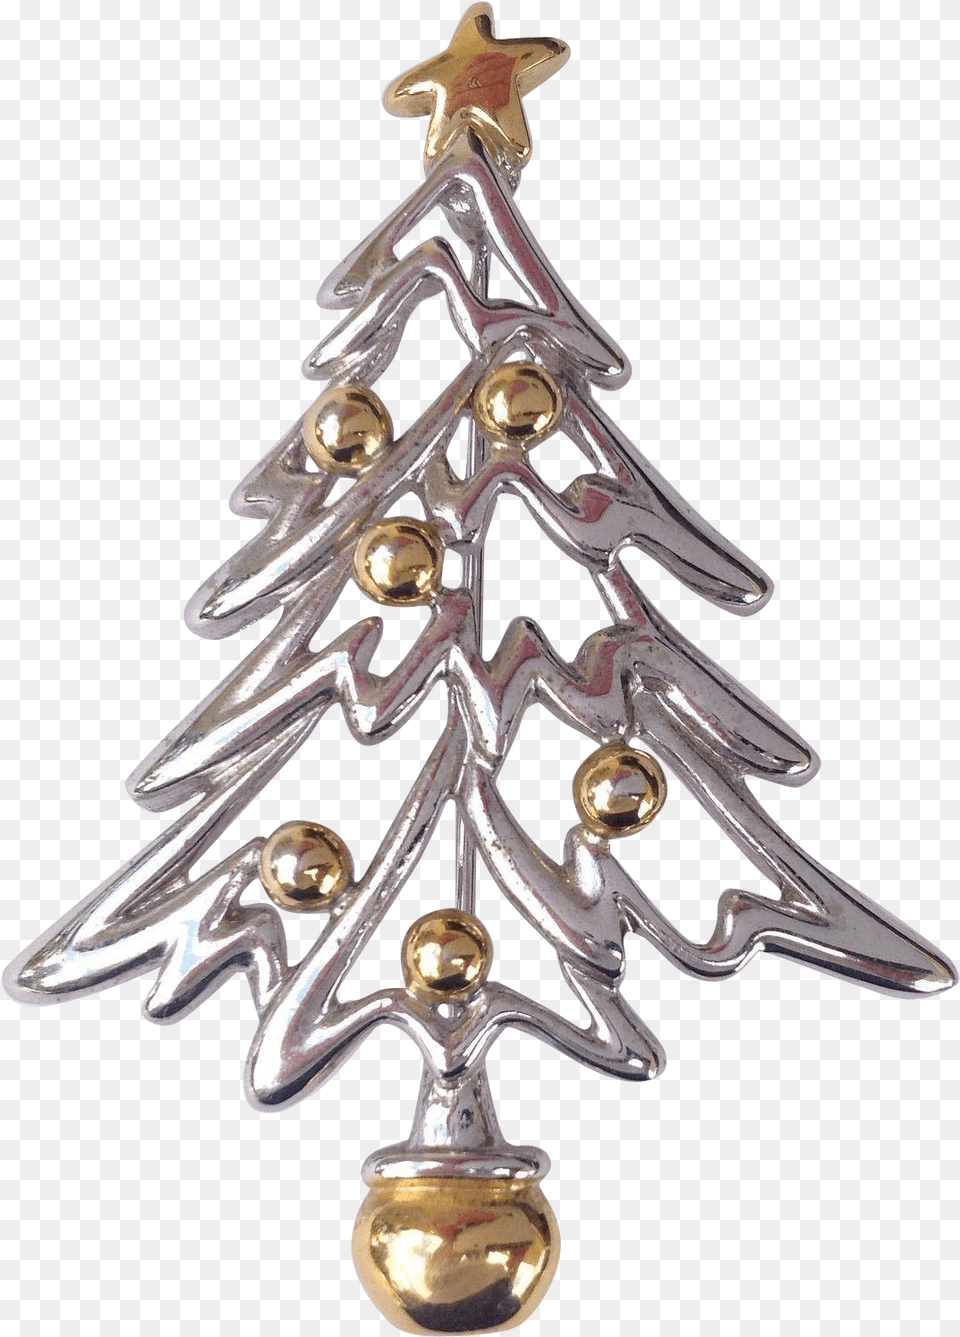 Vintage Modern Silver And Gold Tone Christmas Tree Christmas Ornament, Accessories, Earring, Jewelry, Christmas Decorations Png Image